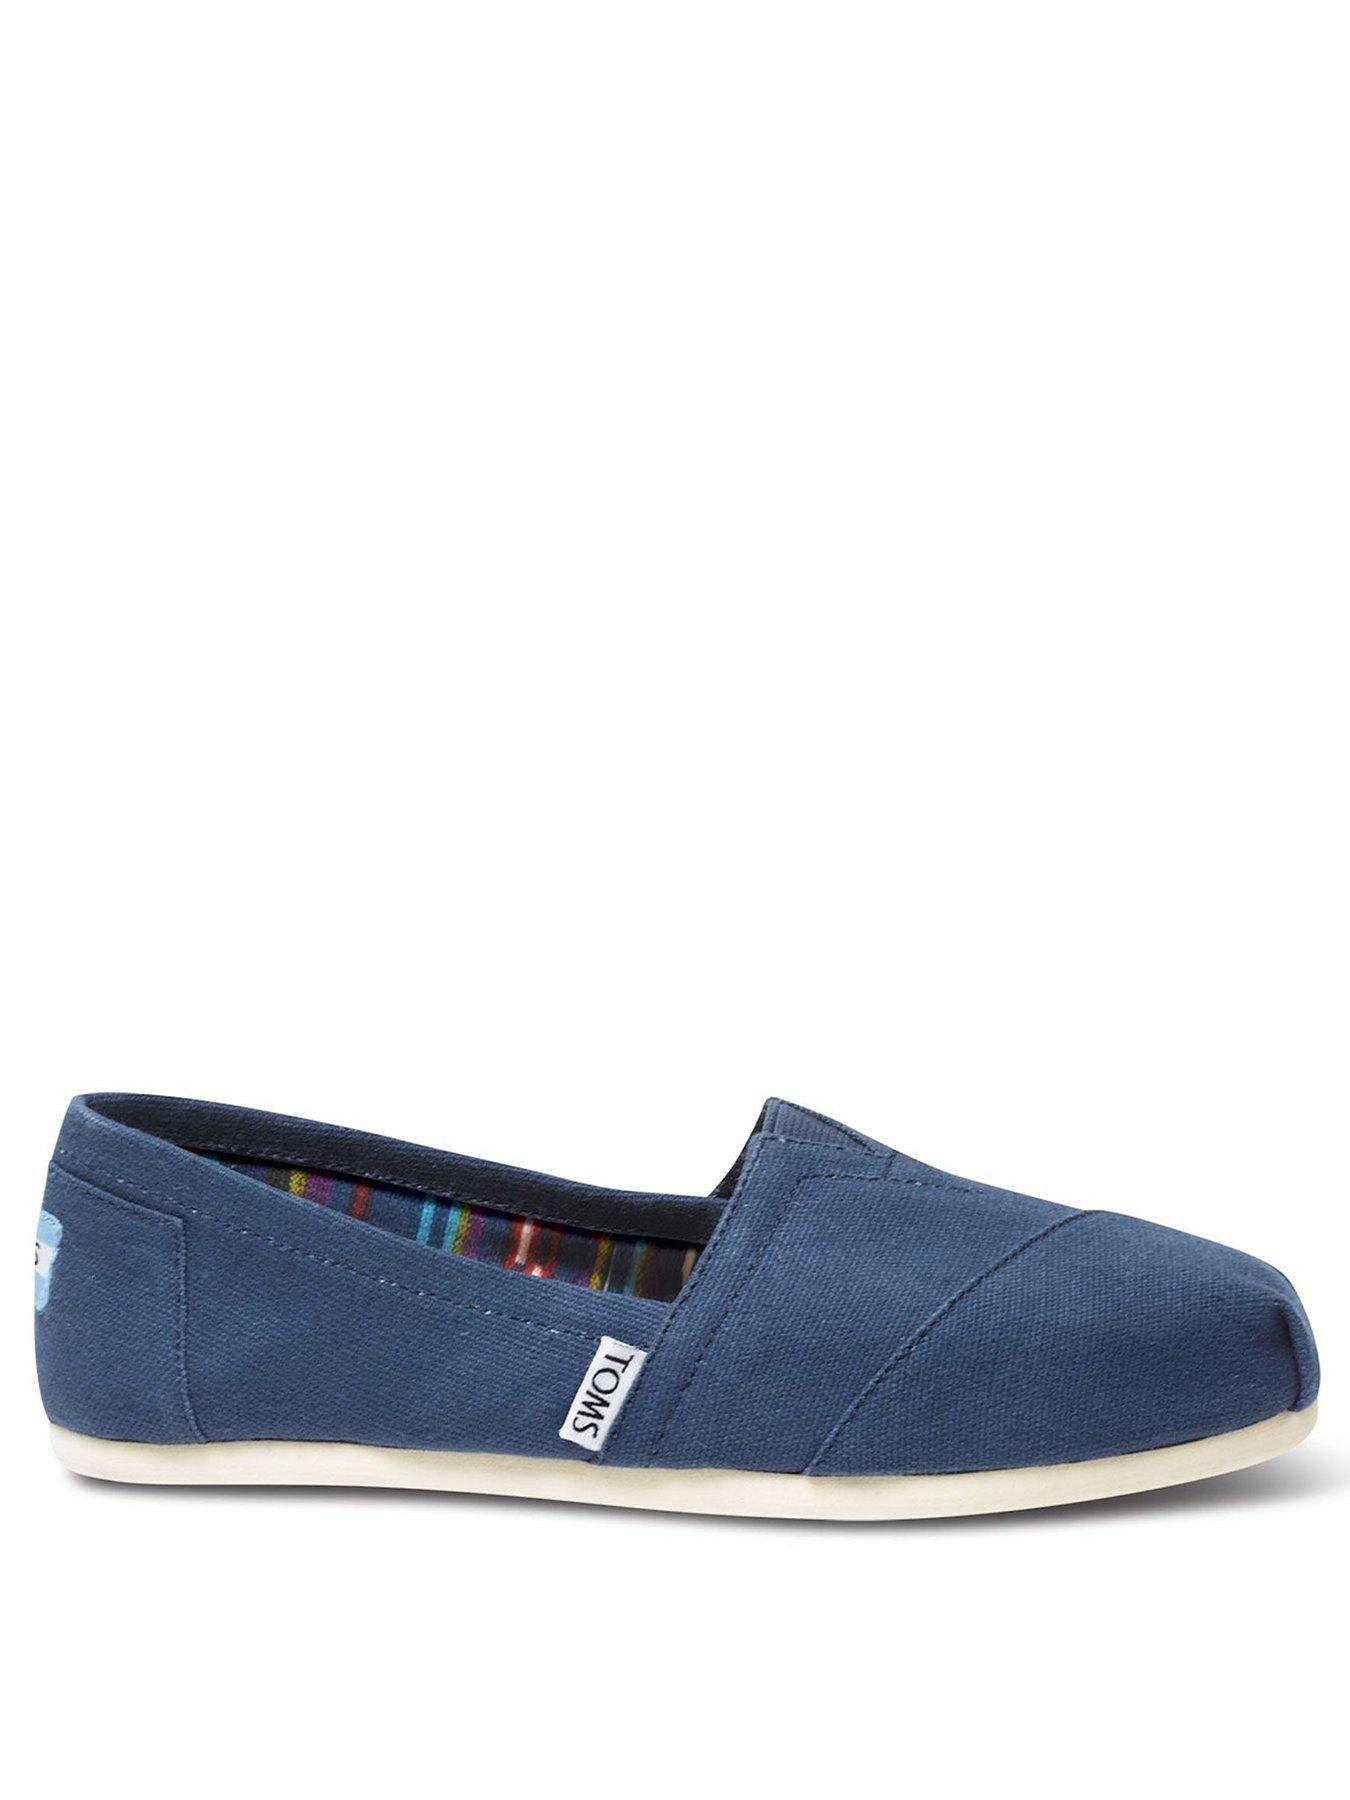 Toms | Toms Shoes | Very.co.uk